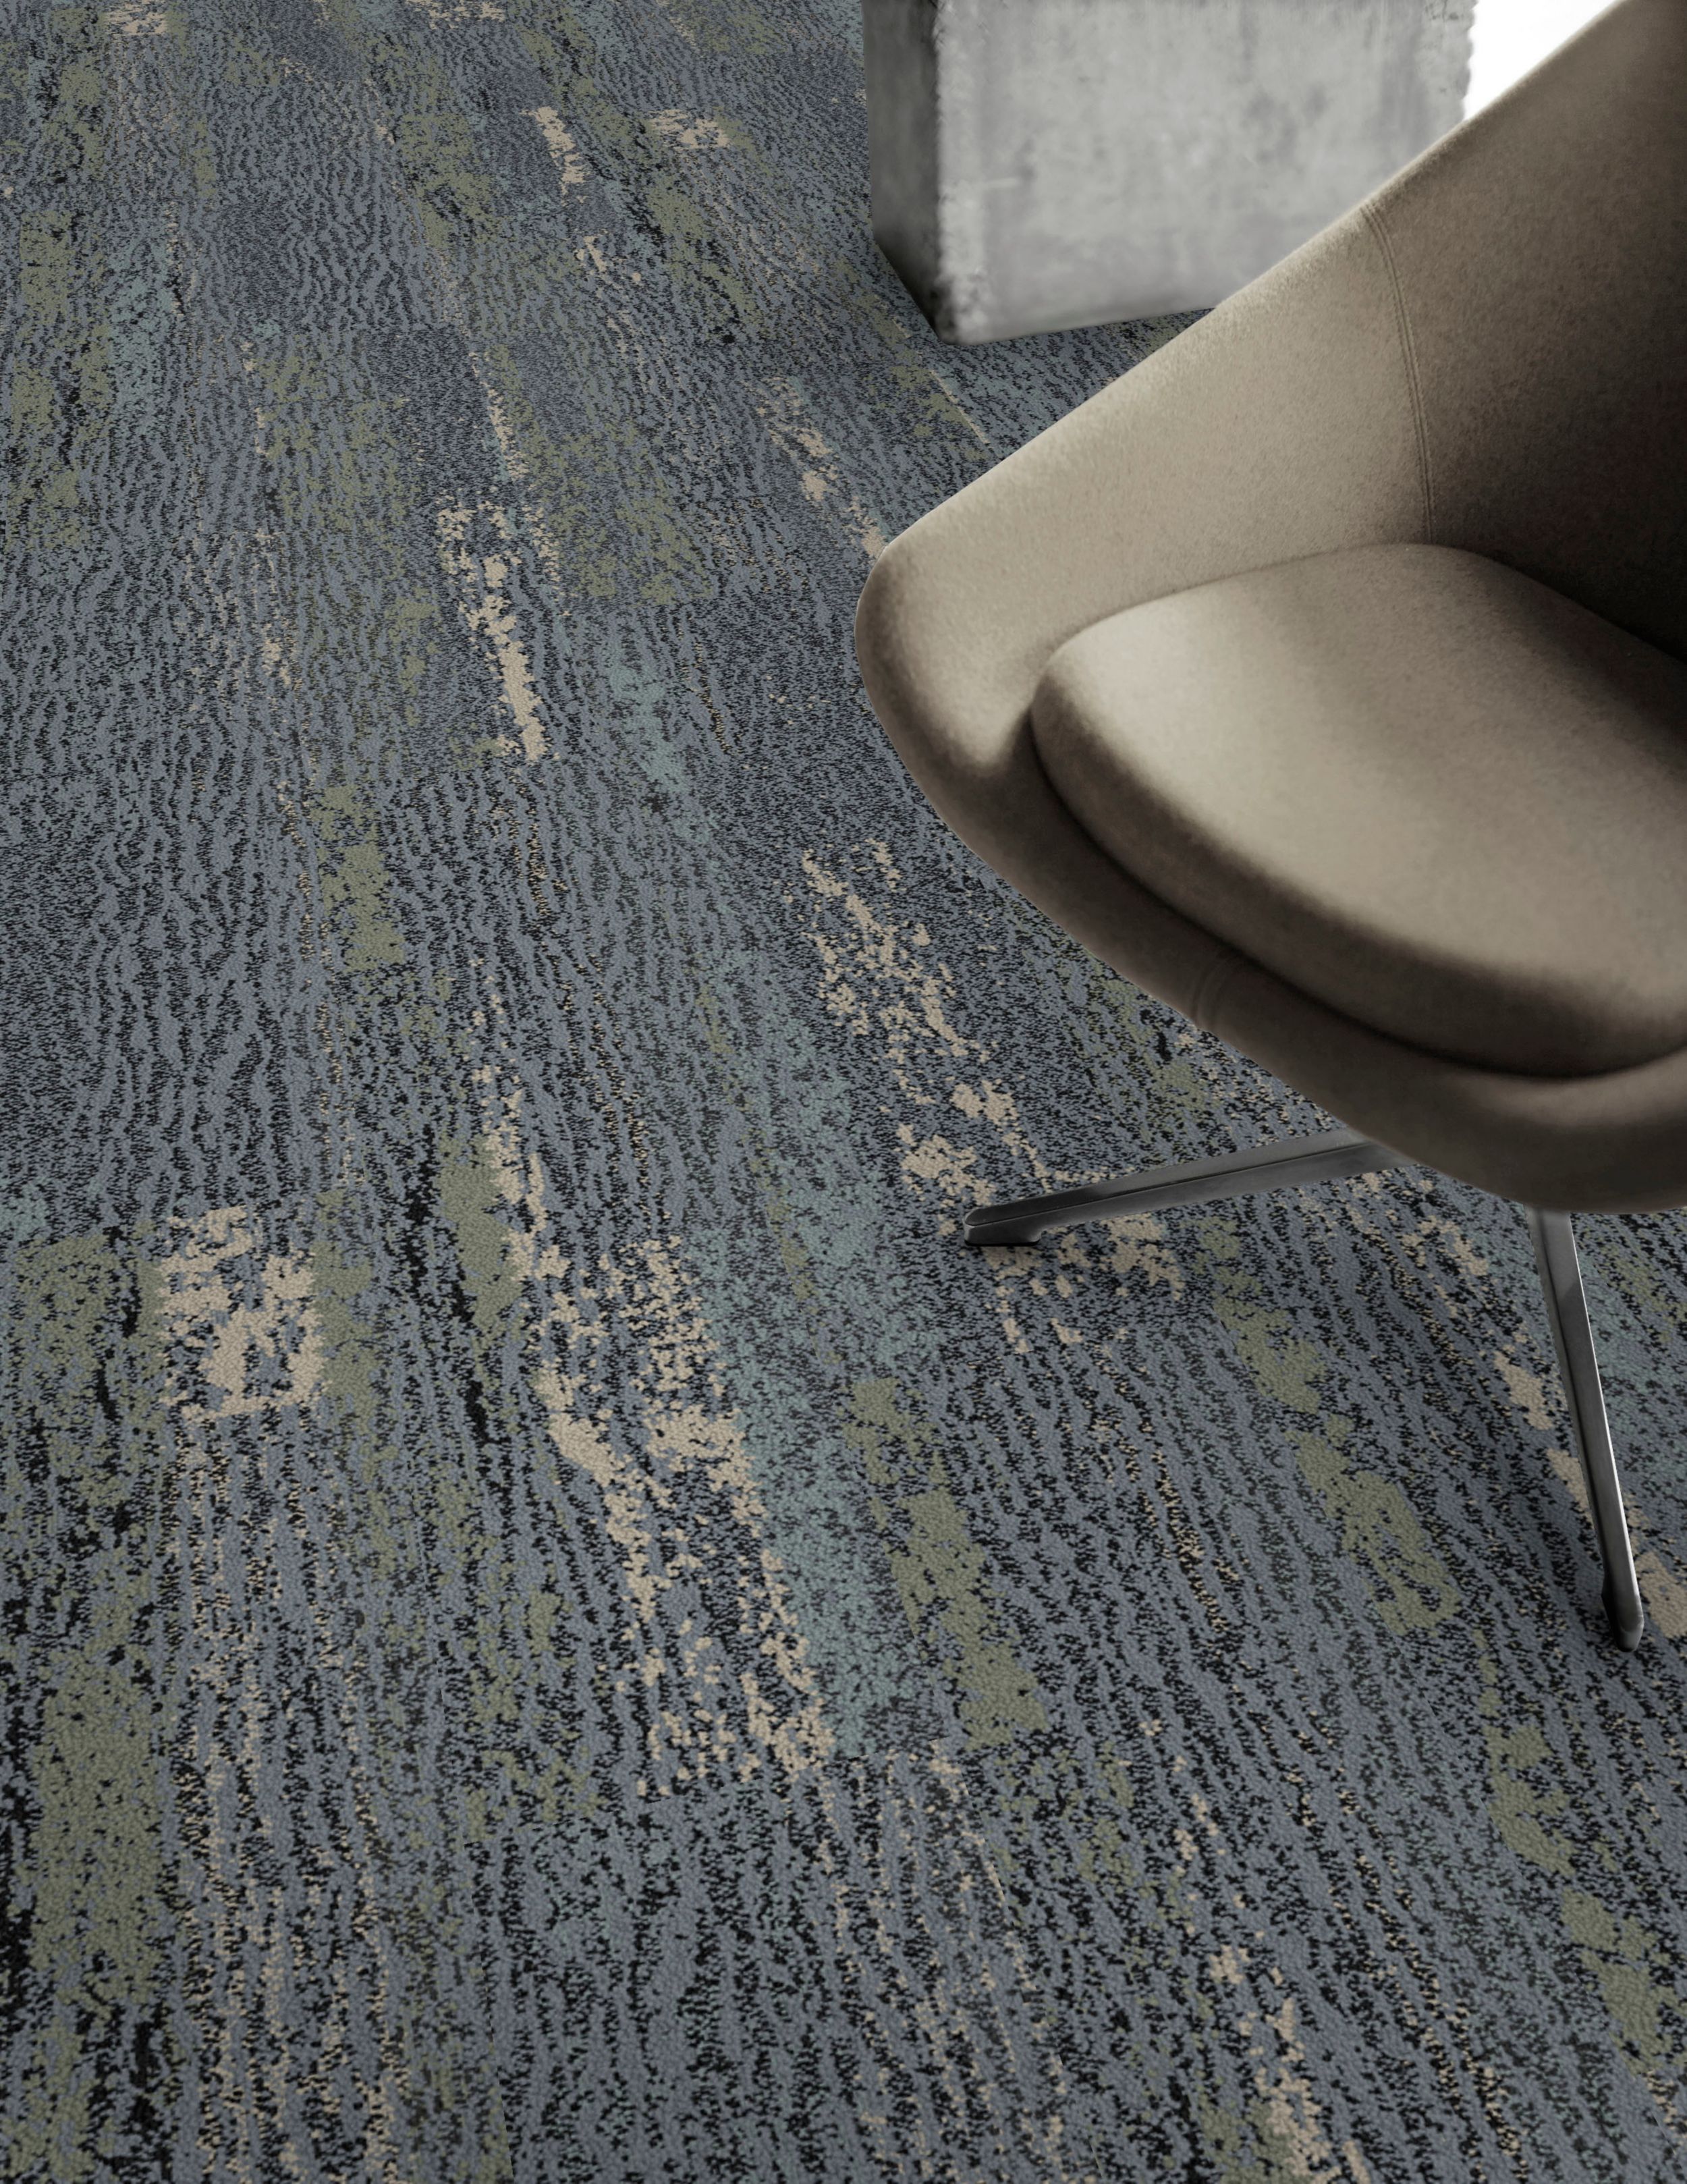 Detail of Interface Uprooted plank carpet tile with chair numéro d’image 5